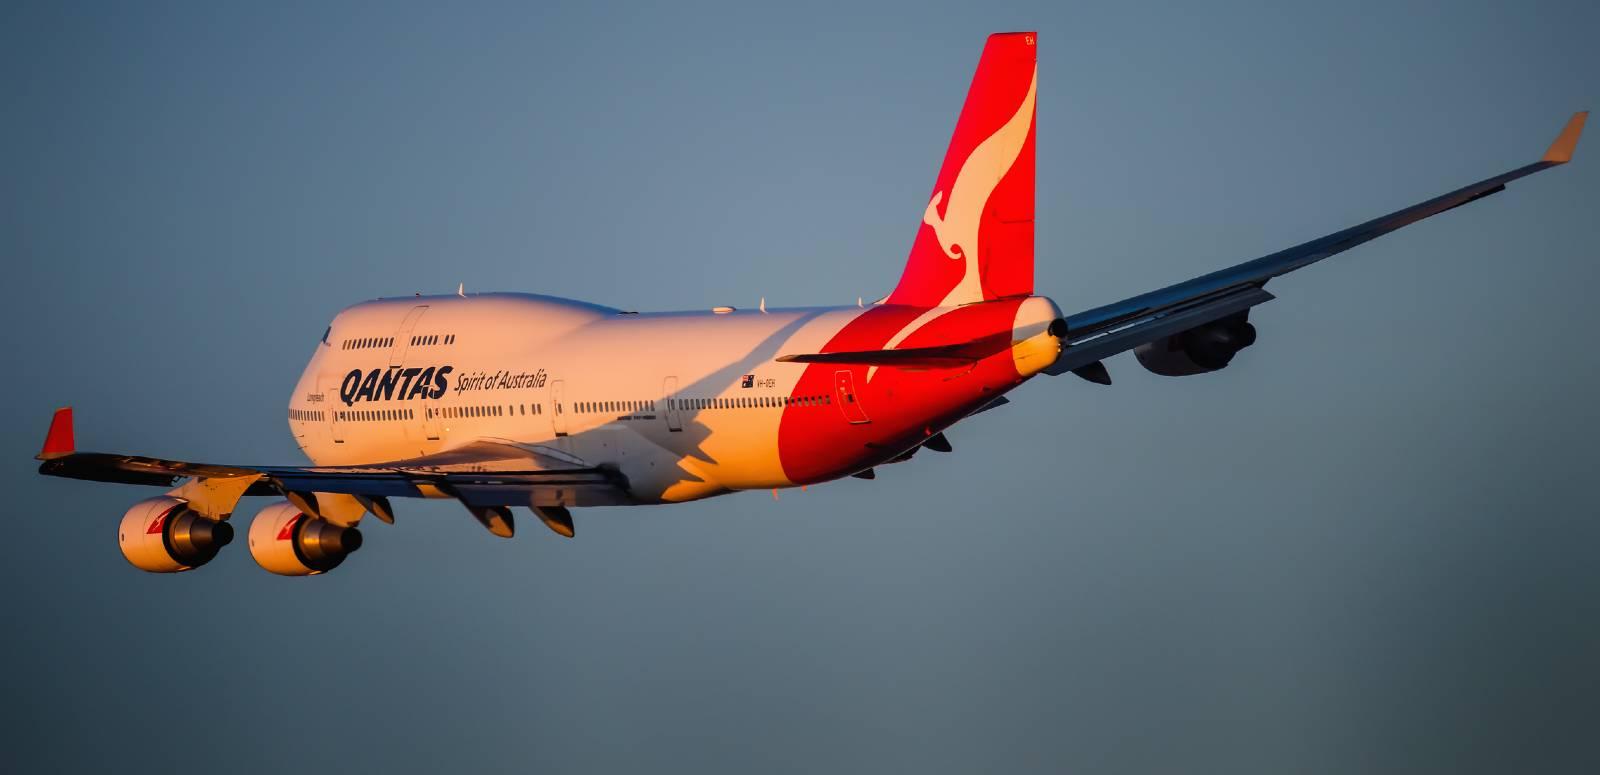 A passenger aircraft Boeing 747-400 in Qantas colour scheme taking off from Kingsford Smith airport